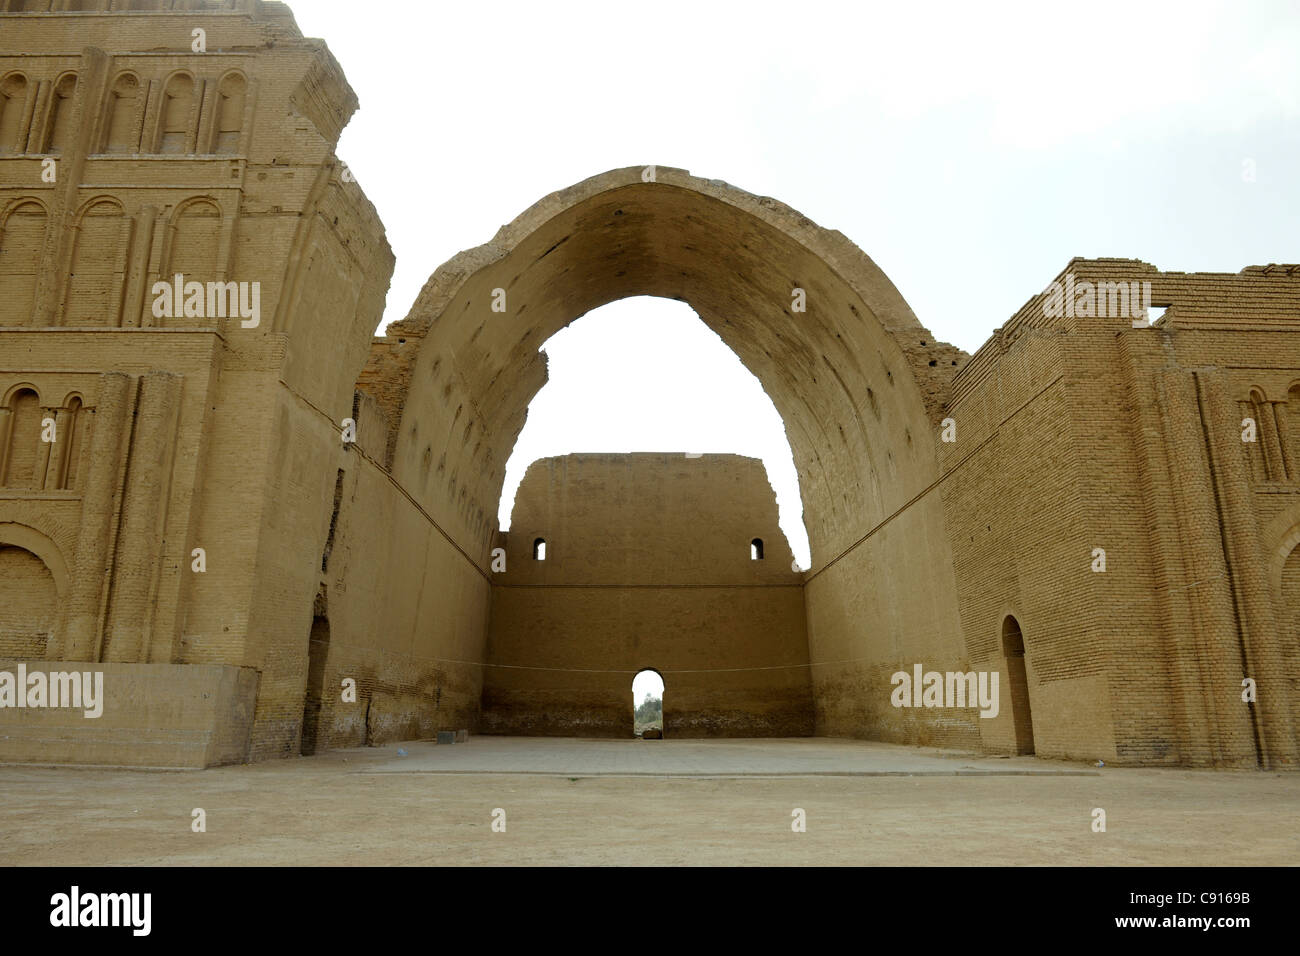 Iraq, Ctesiphon, The ancient arch stand 37 meters tall. Stock Photo